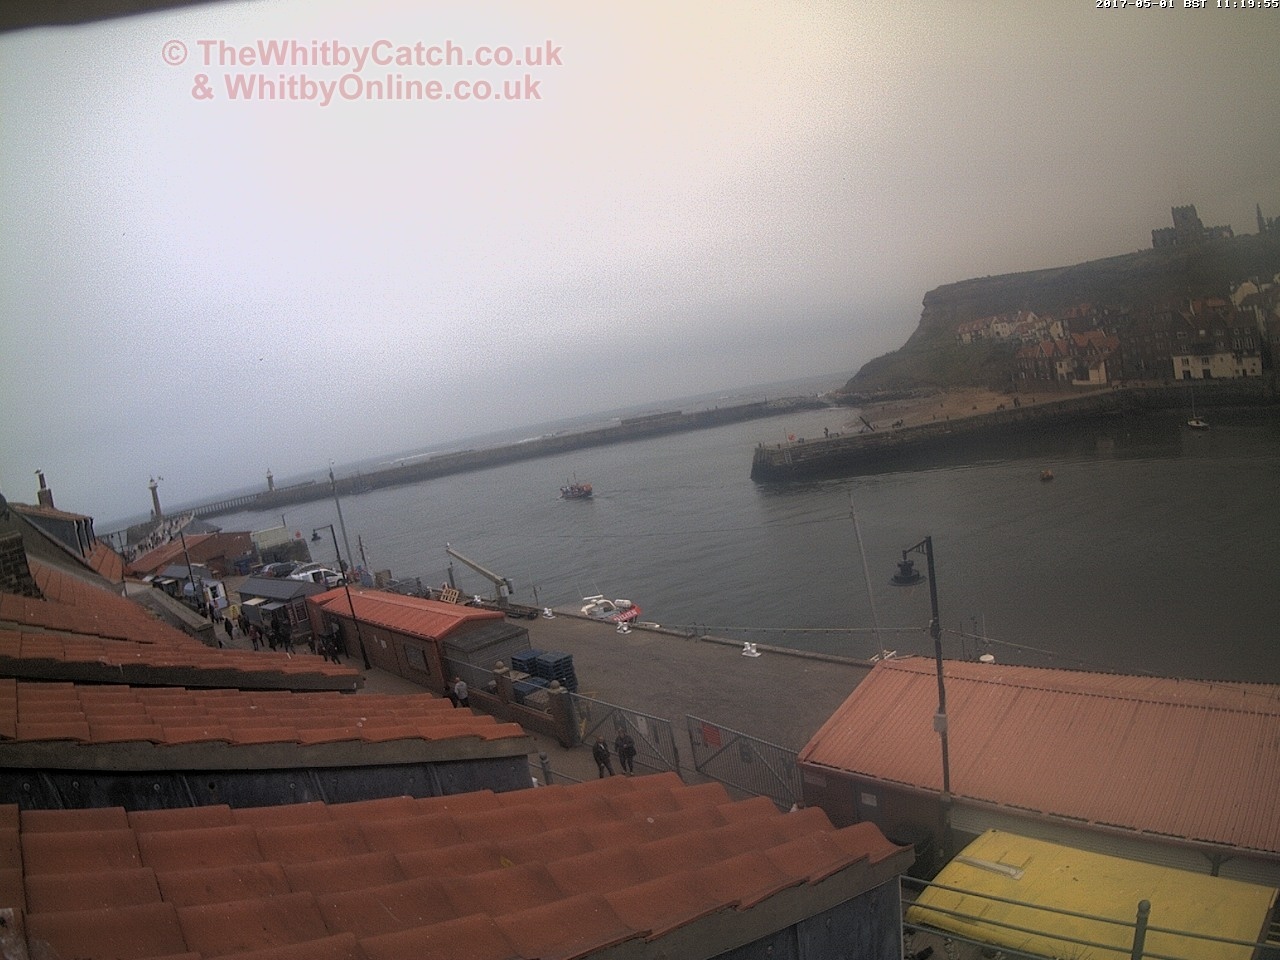 Whitby Mon 1st May 2017 11:20.